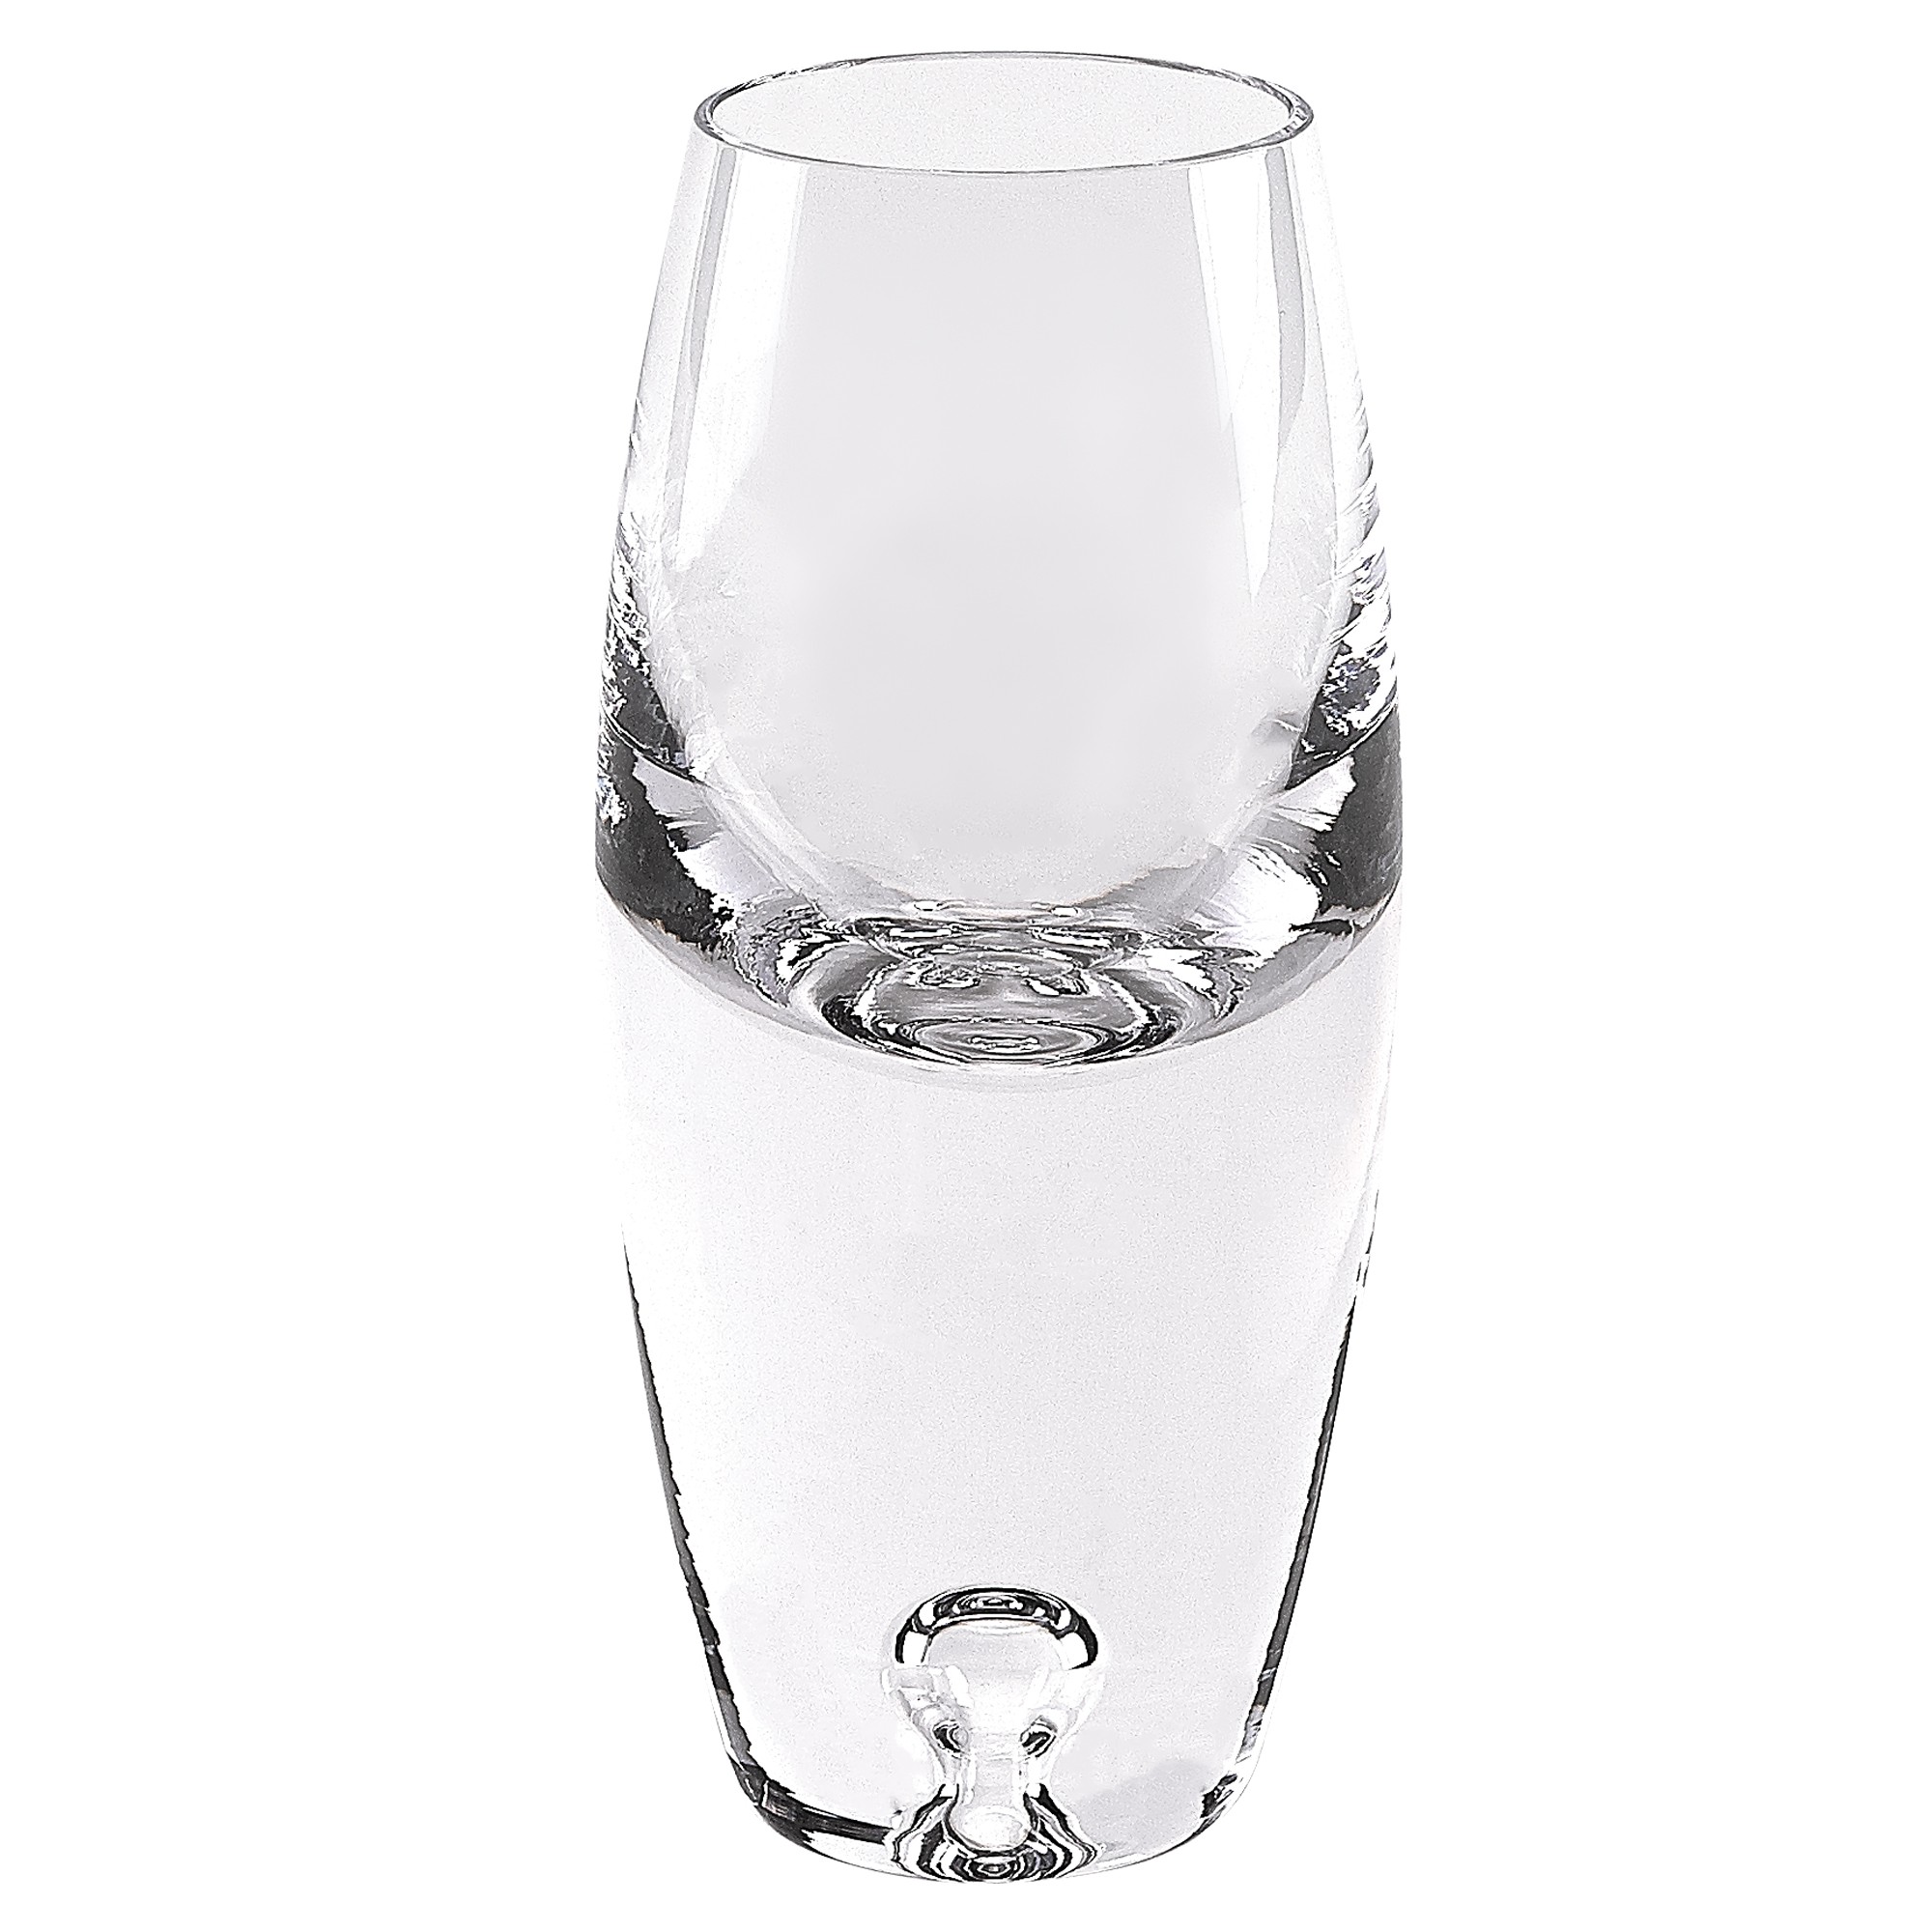 Mouth Blown Glass Pair of Tall Shot Glasses 2.5 oz